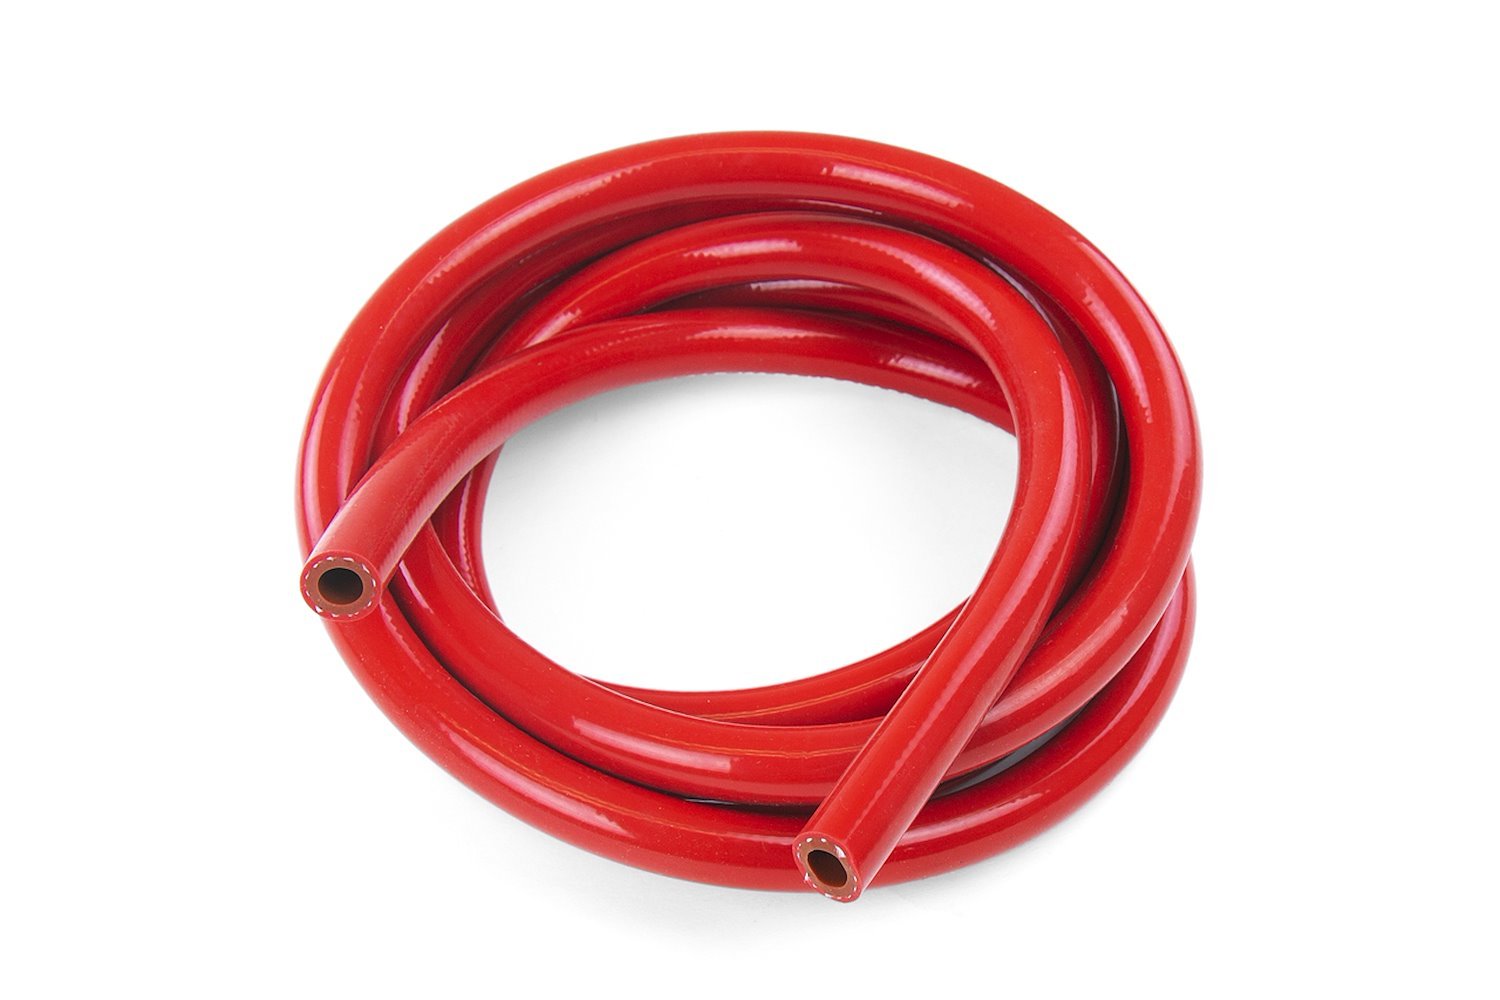 HTHH-075-REDx10 Silicone Heater Hose Tubing, High-Temp 1-Ply Reinforced, 3/4 in. ID, 10 ft. Roll, Red